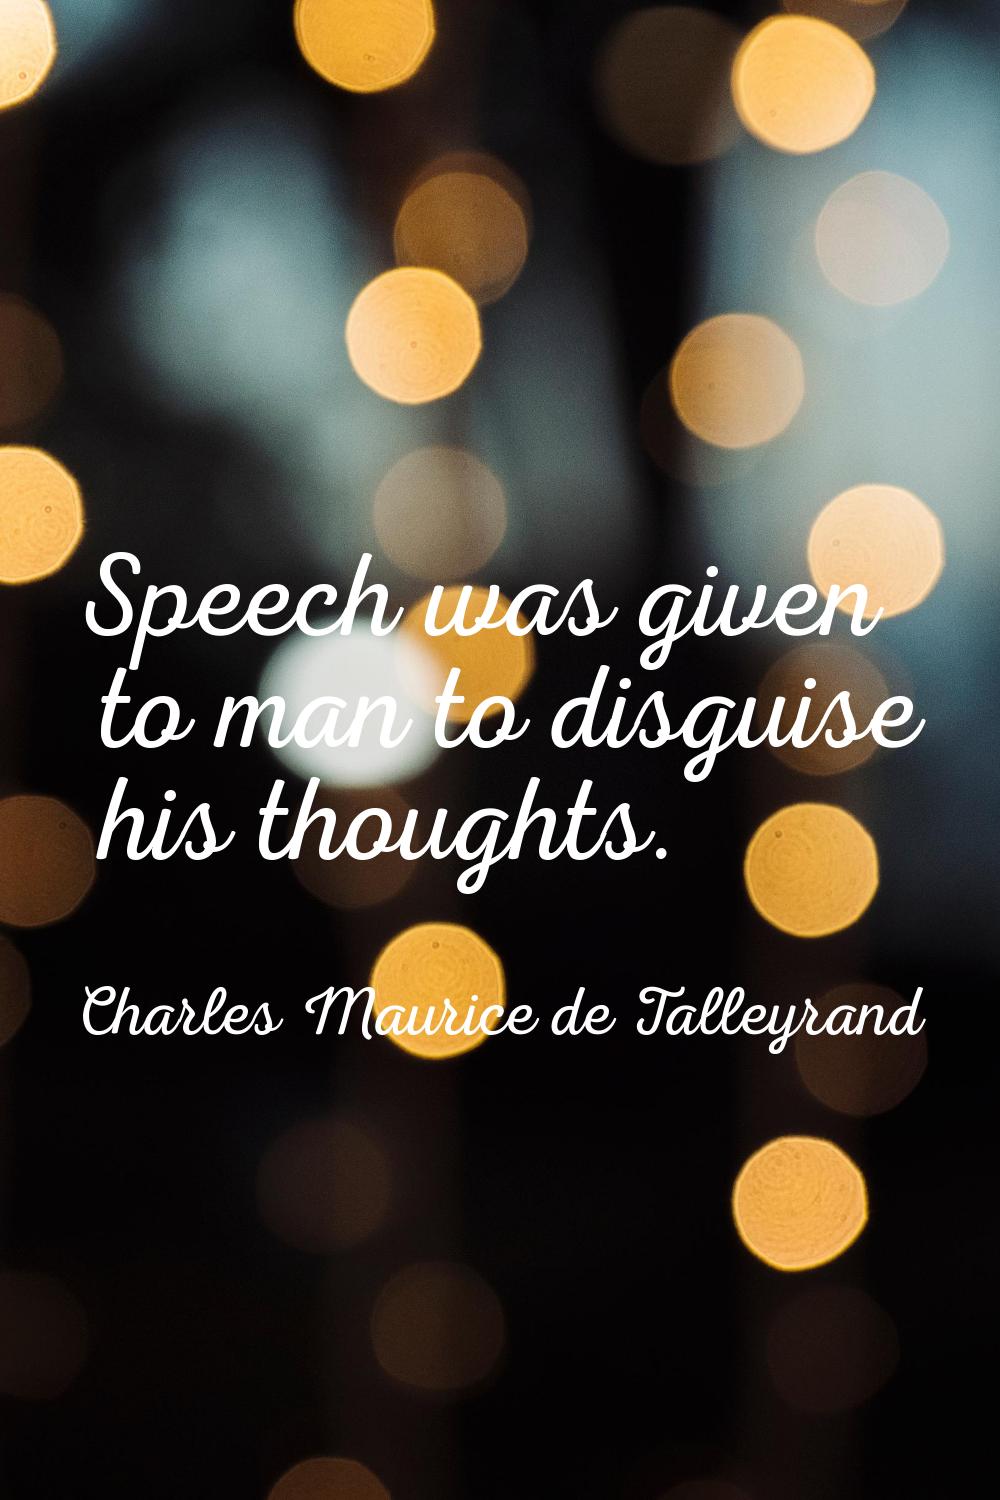 Speech was given to man to disguise his thoughts.